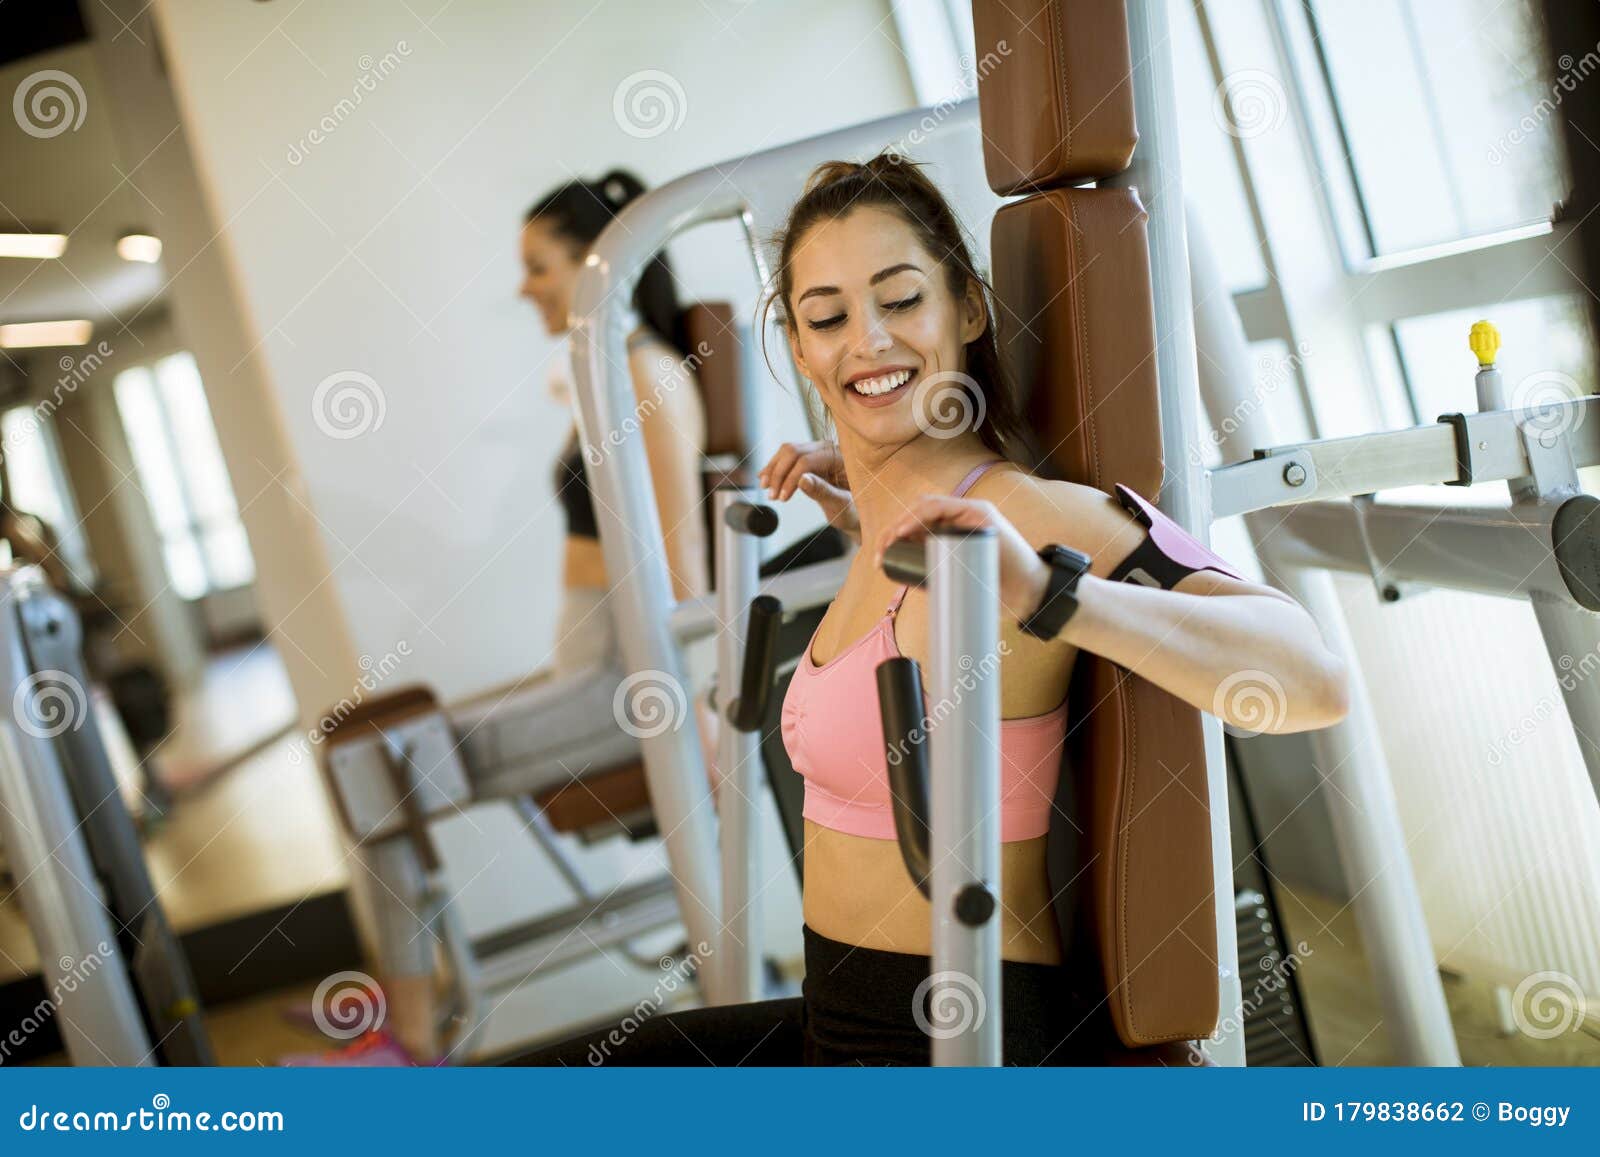 Young Determined Fitness Woman Doing Exercises at Chest Press Machine ...